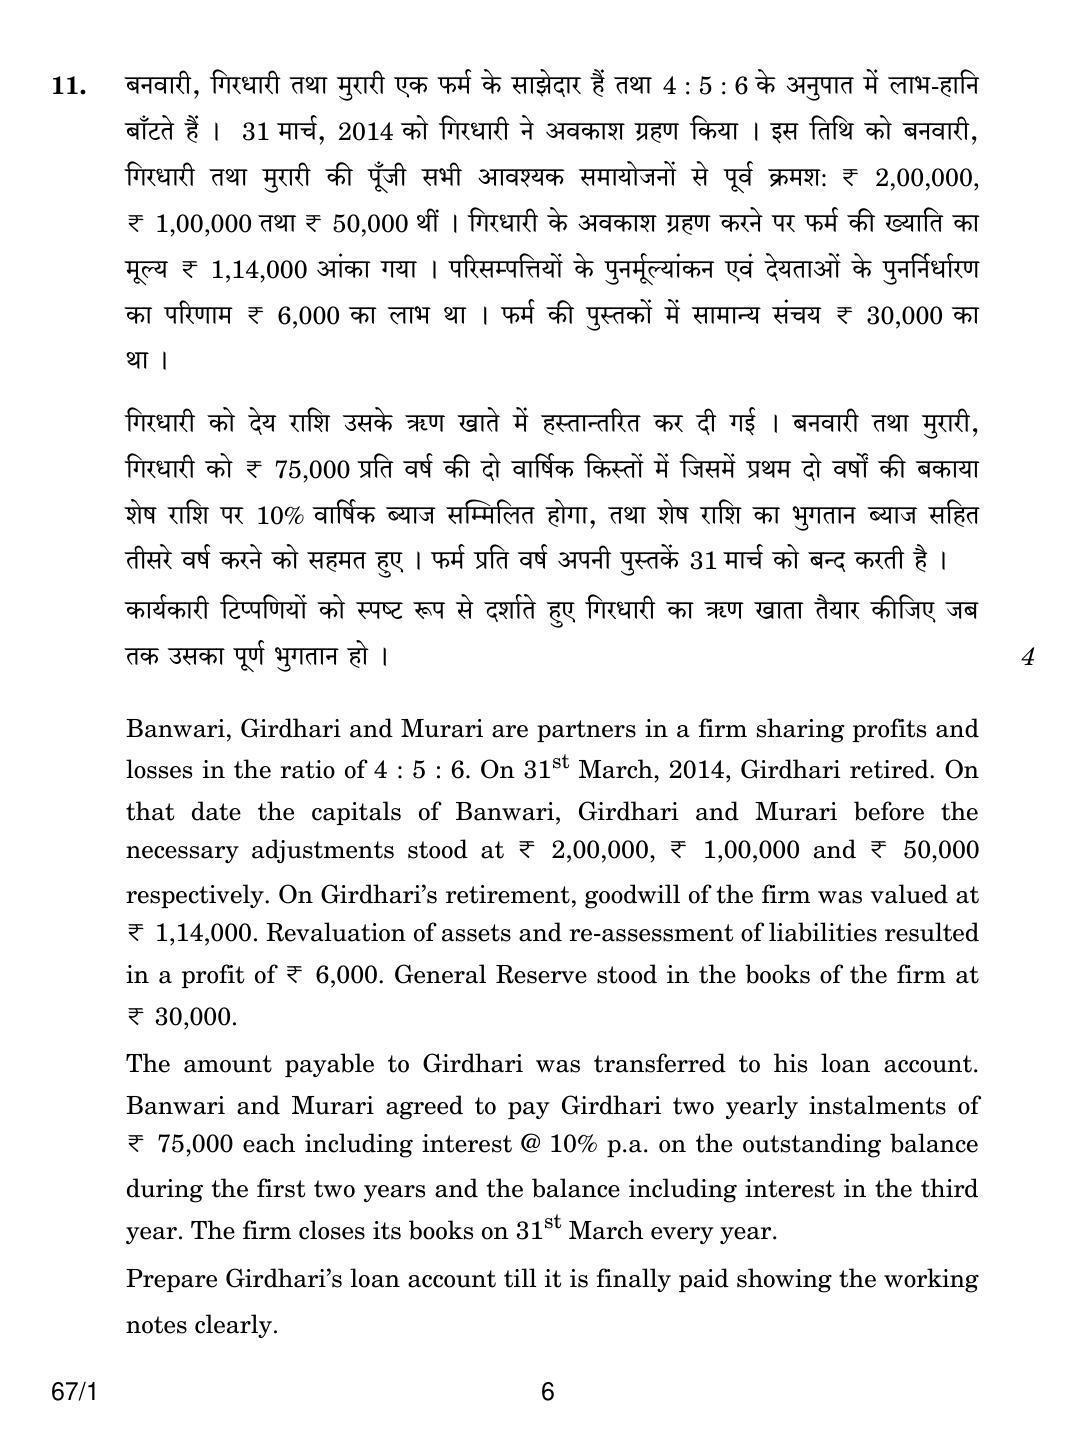 CBSE Class 12 67-1 ACCOUNTANCY 2018 Question Paper - Page 6